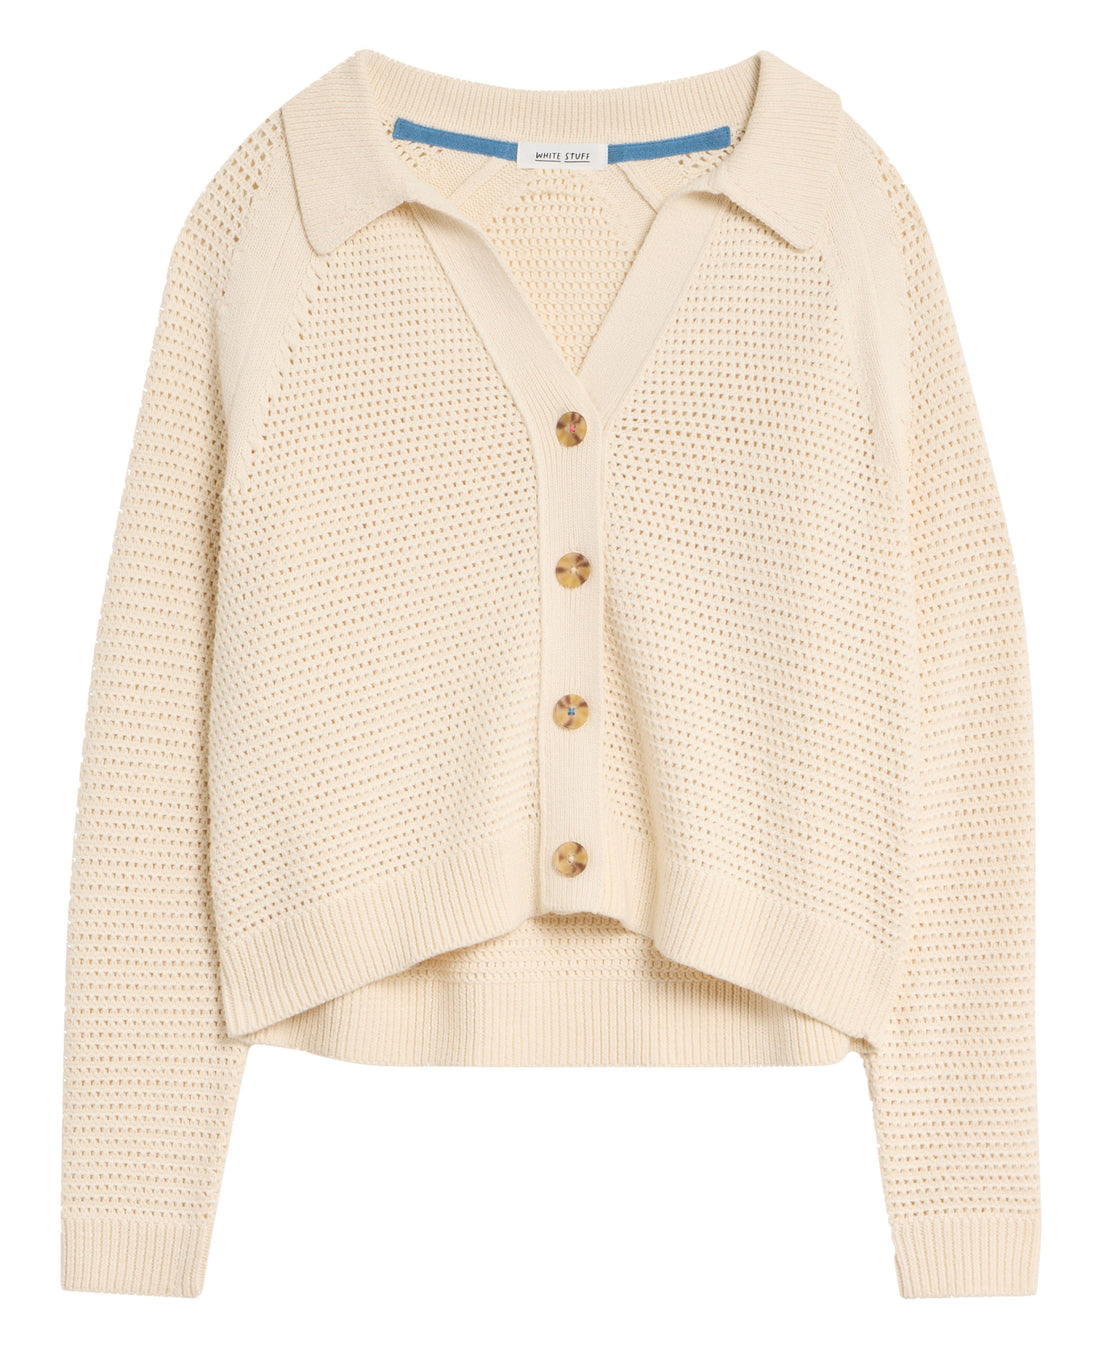 Chaterly Crochet Collar Cardi - Natural White